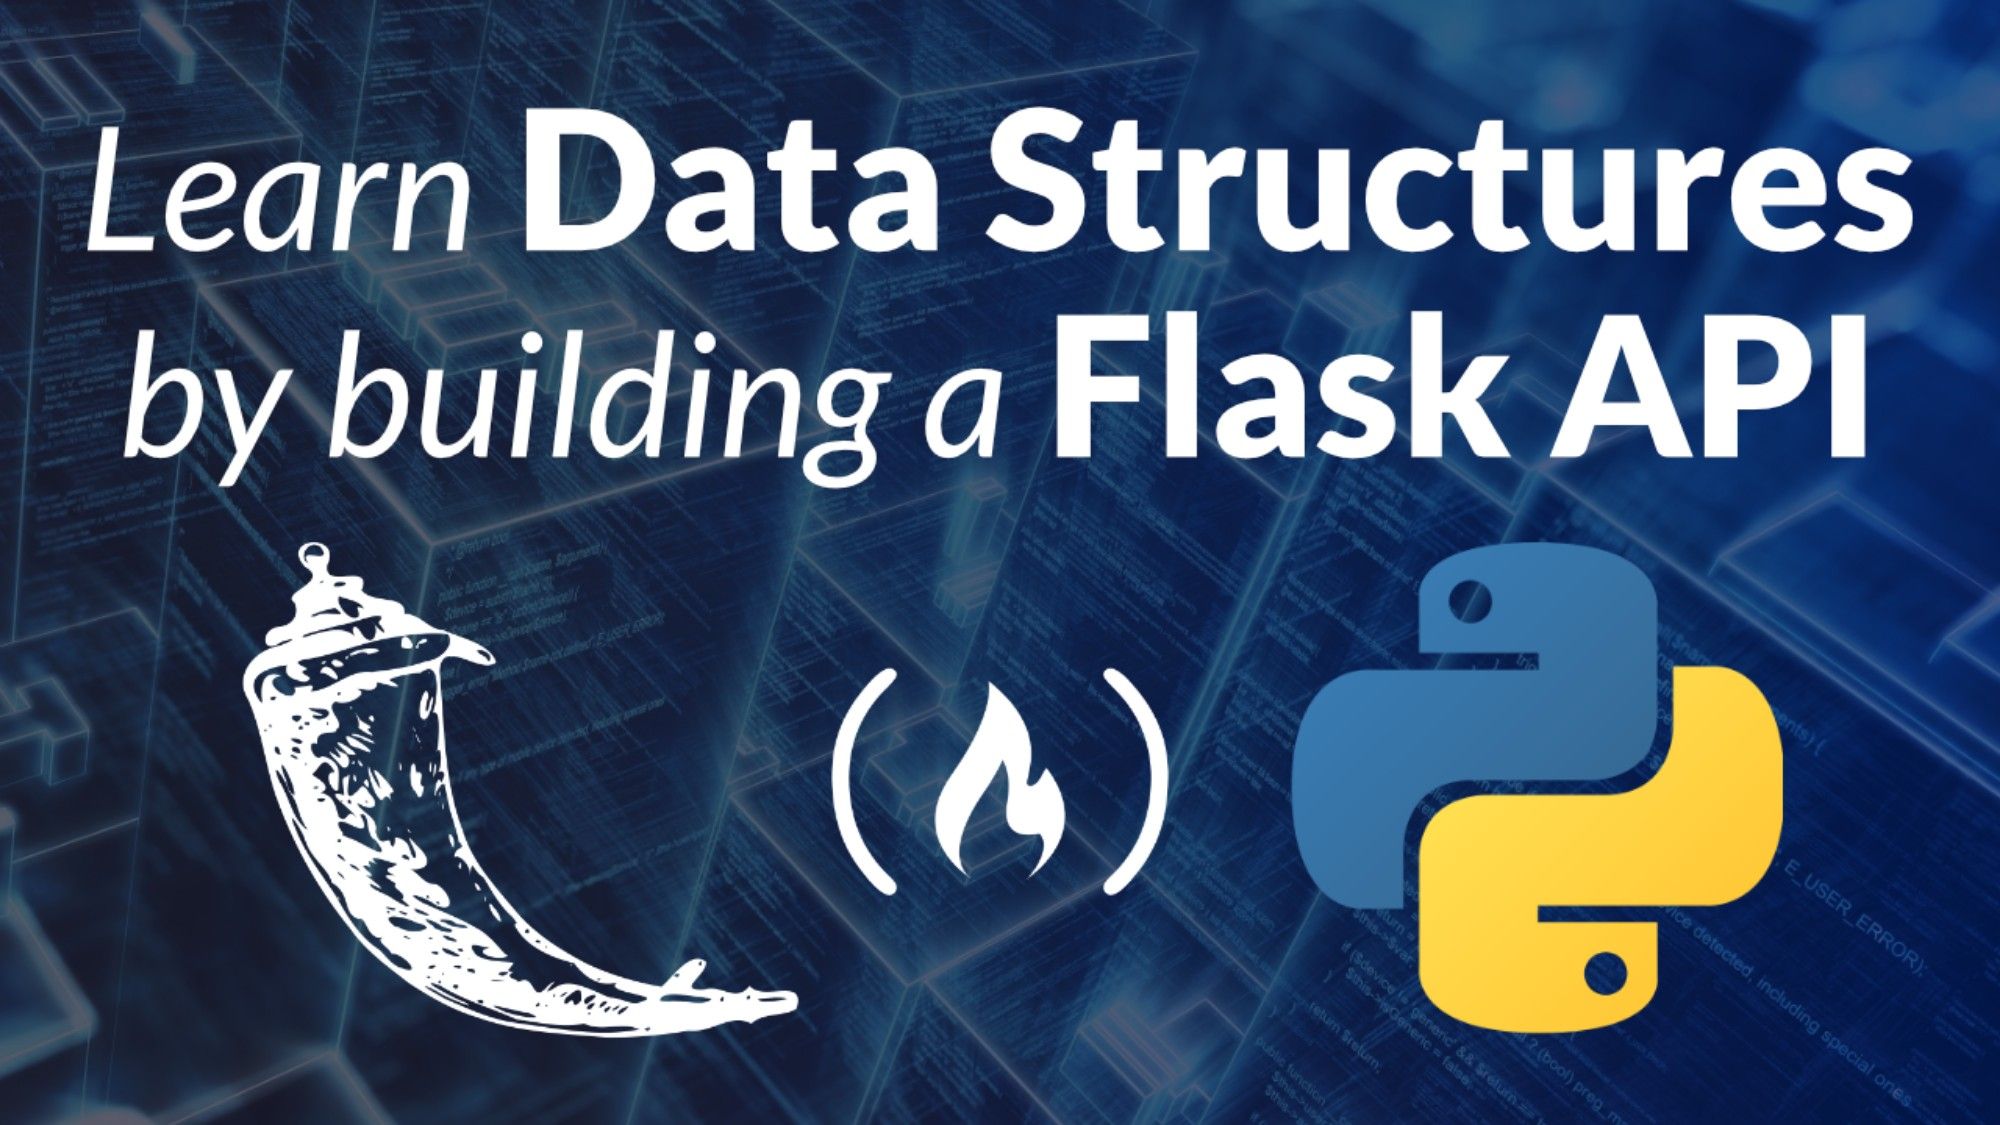 Learn Data Structures by Building a Flask API with Python